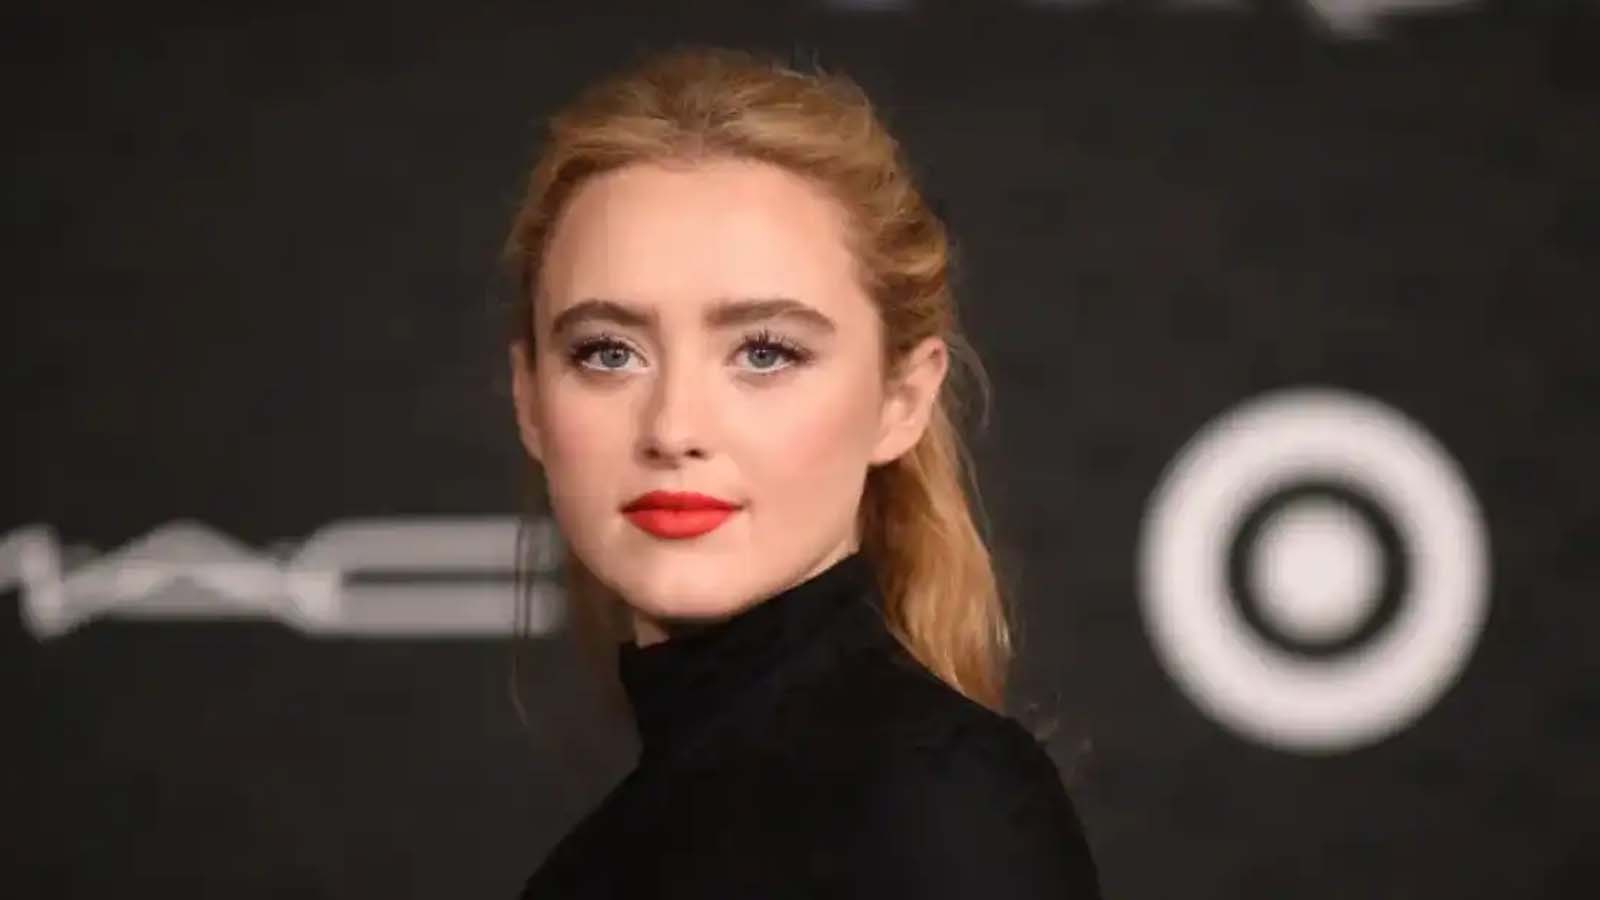 Kathryn Newton Siblings: Does She Have Any Brother Or Sister?